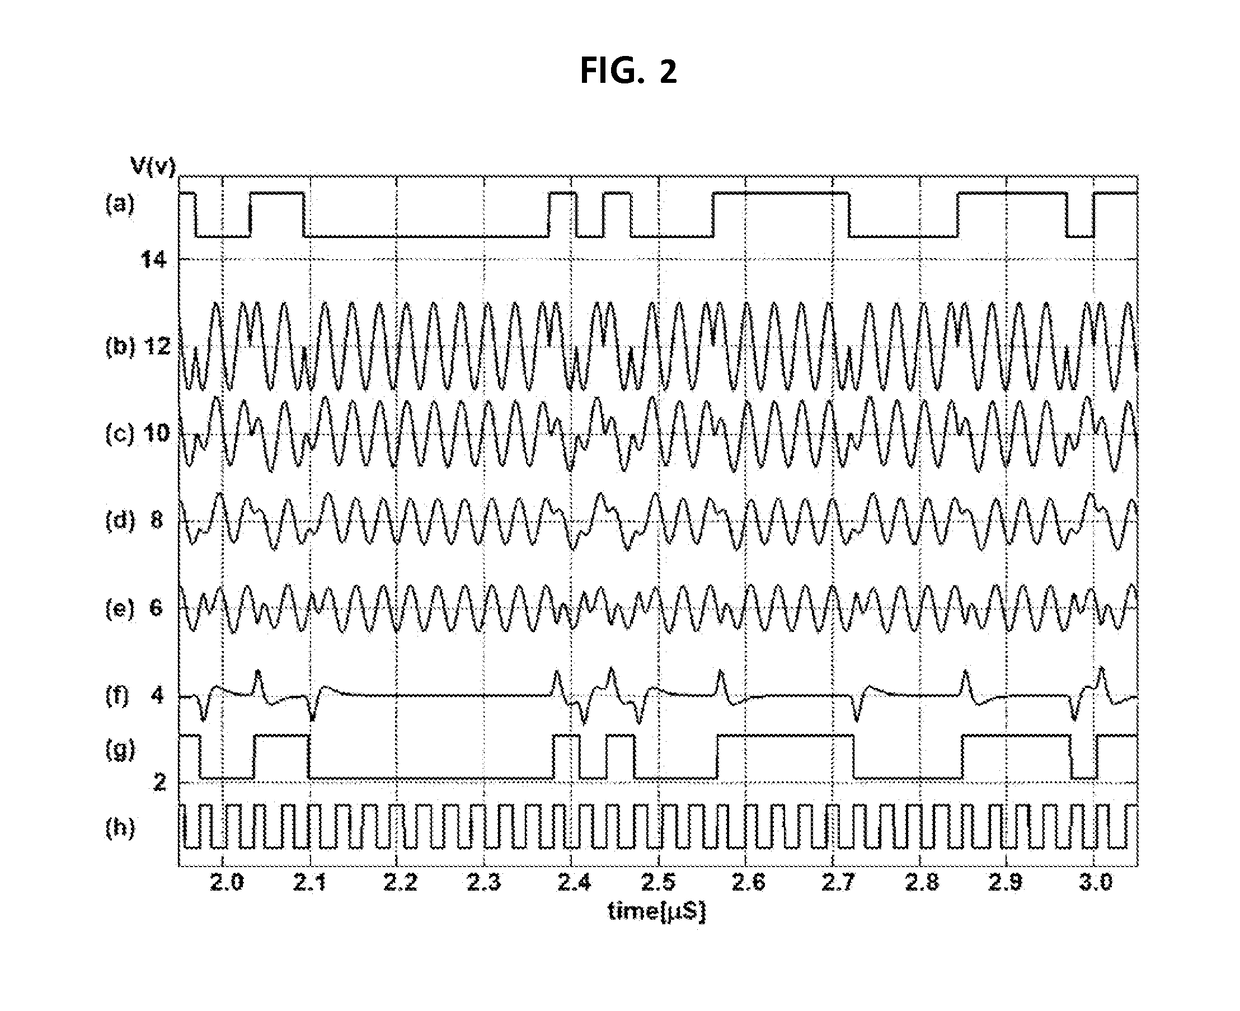 Ultra low power wideband non-coherent binary phase shift keying demodulator using first order sideband filters with phase zero alignment